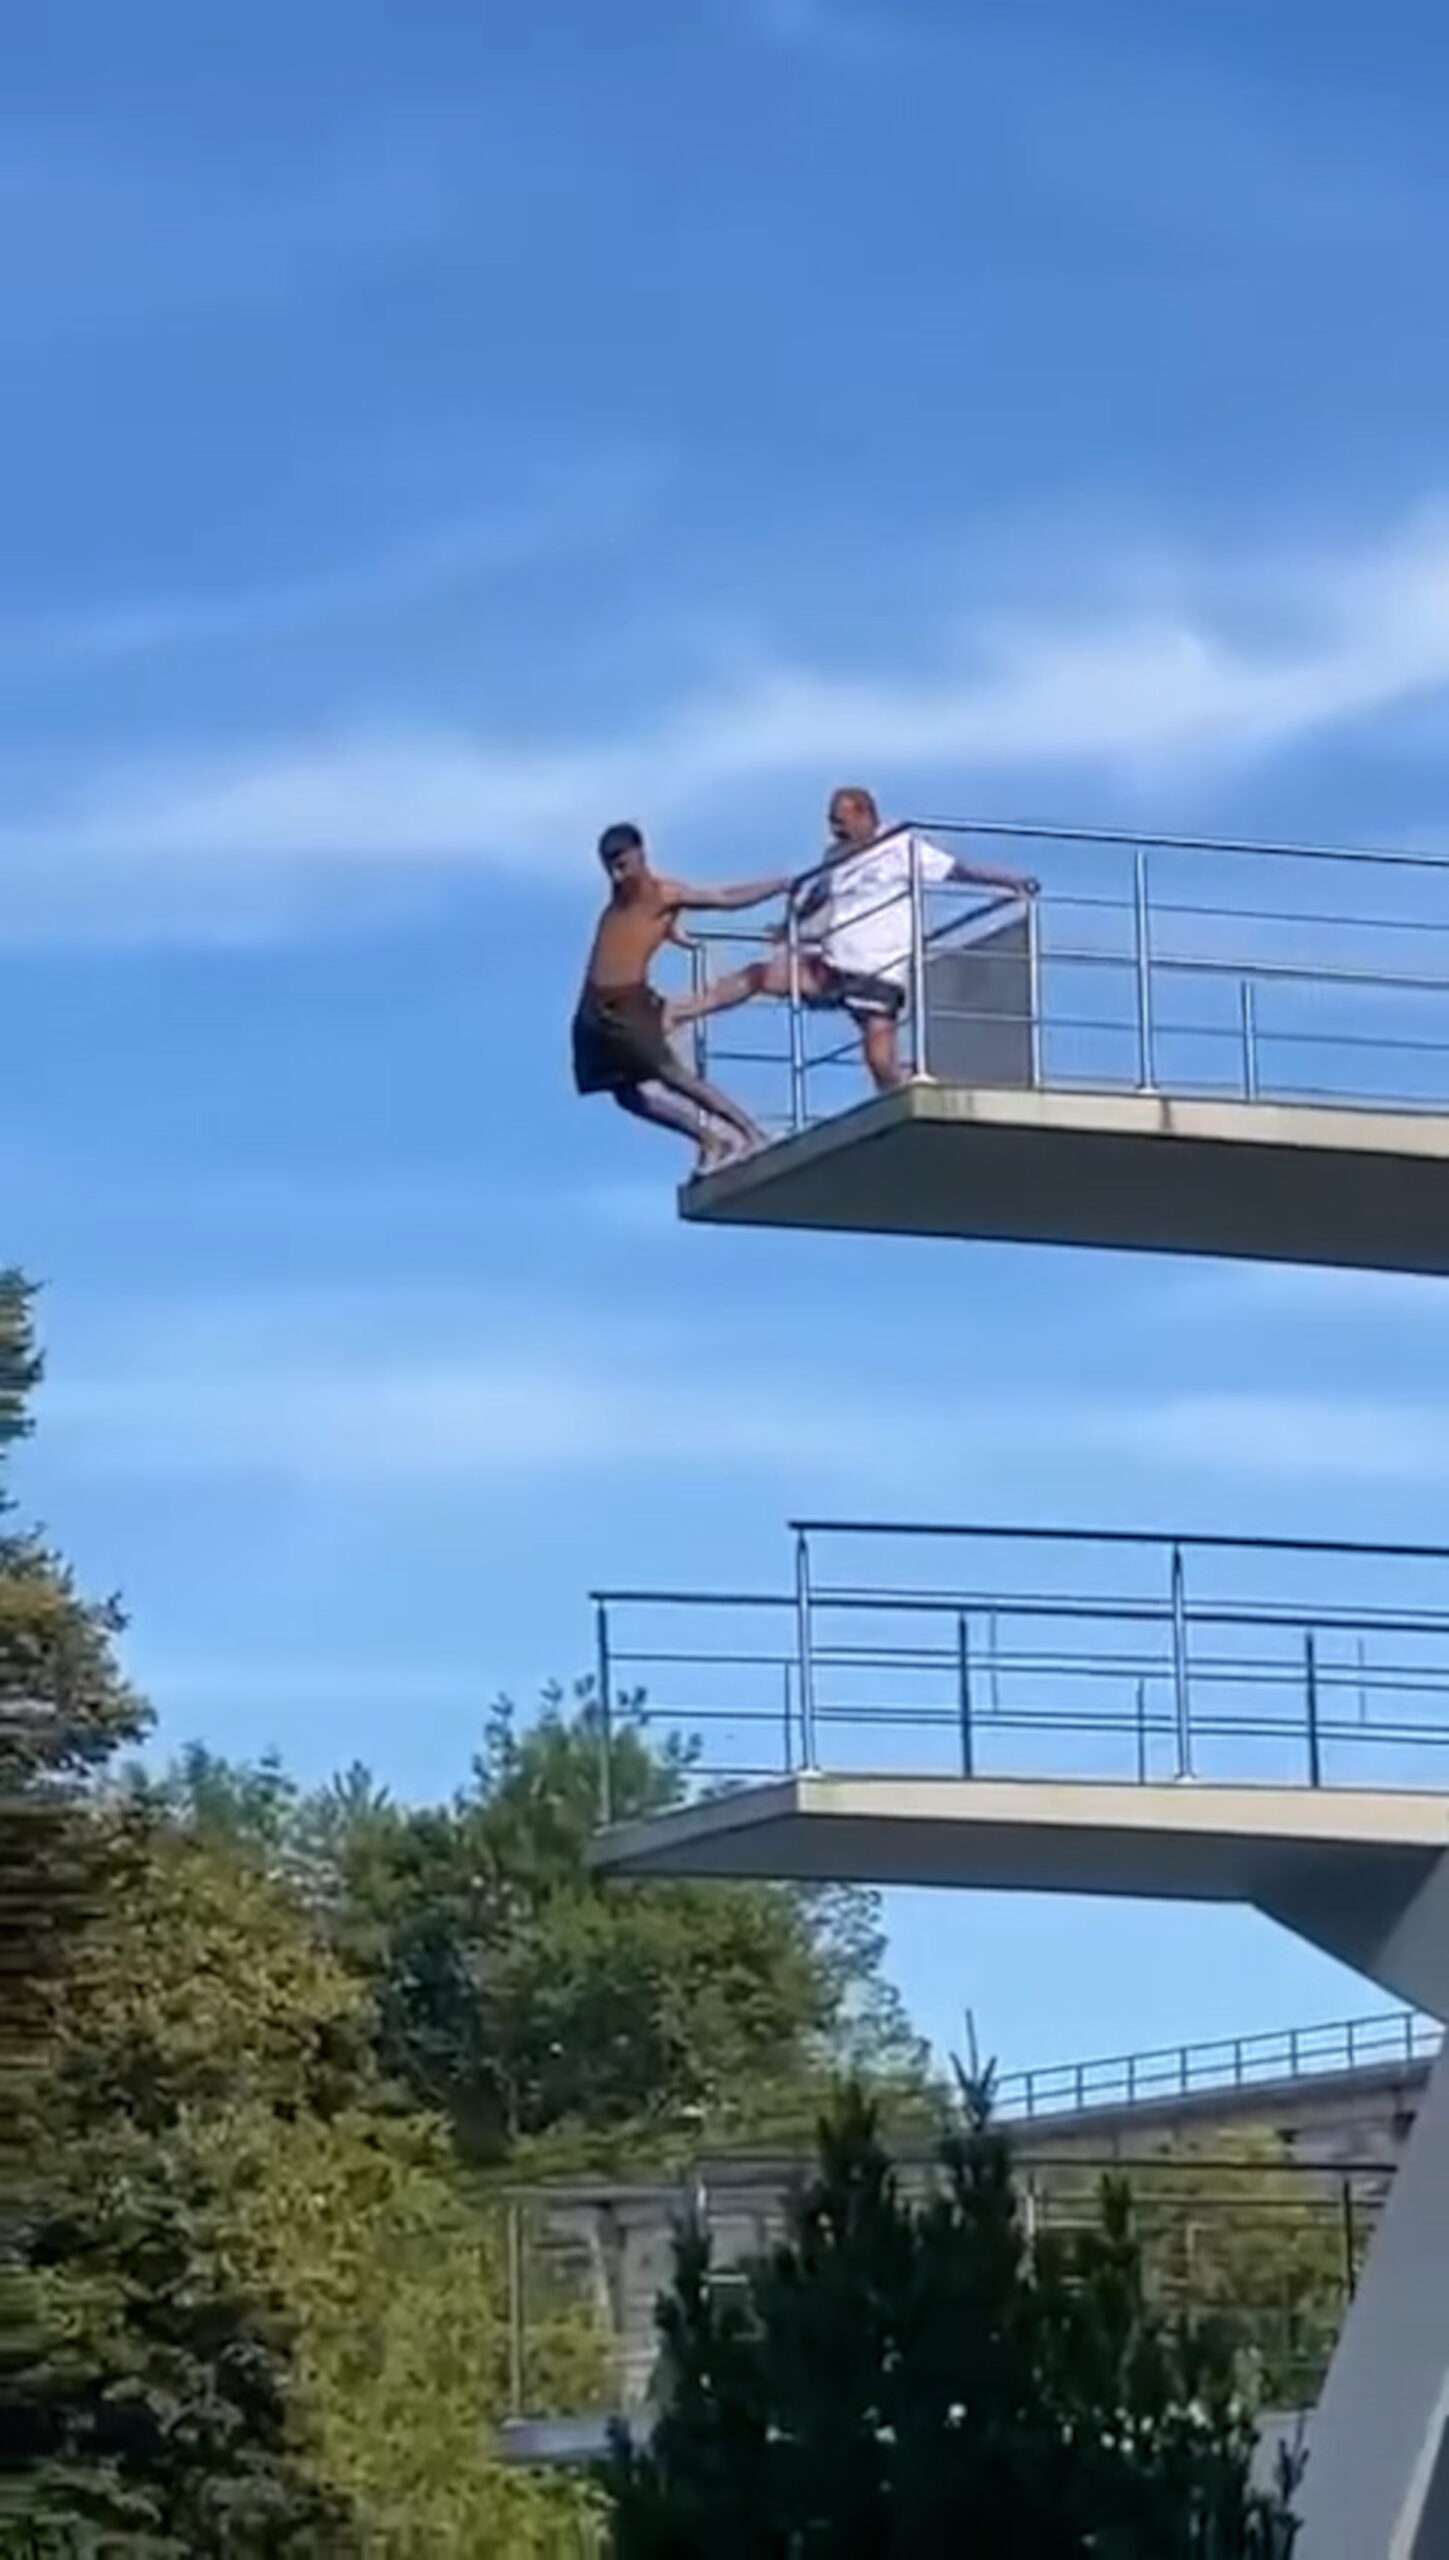 Lifeguard Cleared Of Assault After Video Shows…